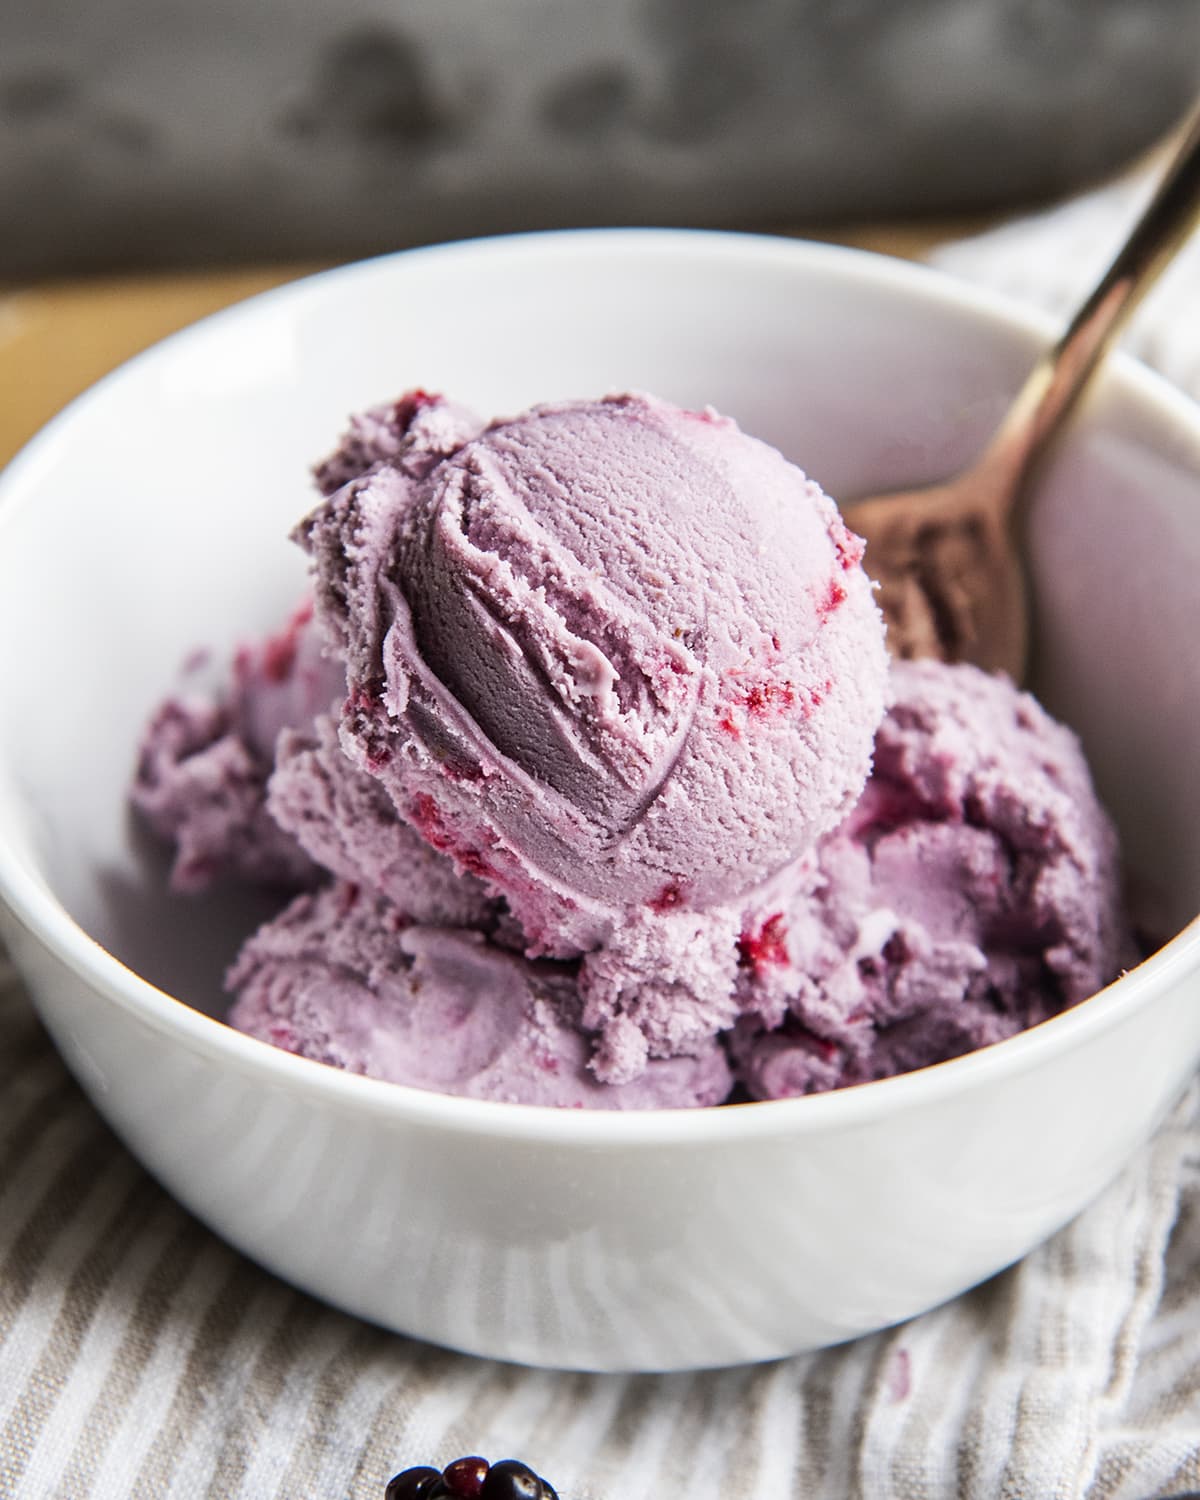 A close up of a bowl of scoops of blackberry ice cream.